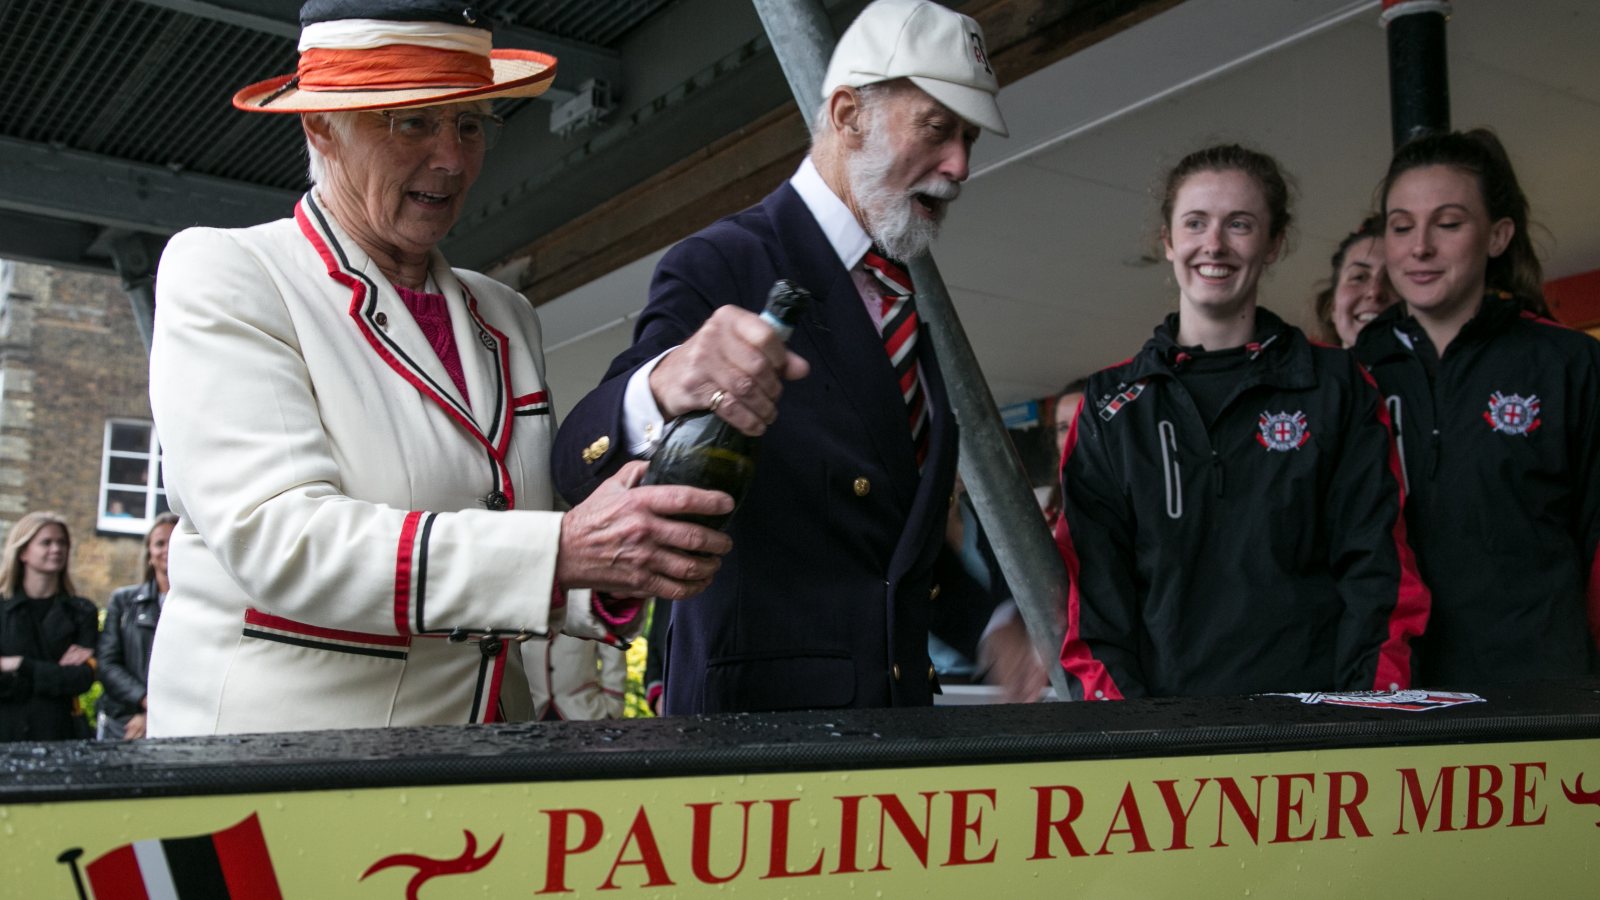 Pauline Rayner naming the boat called after her, with HRH Prince Michael of Kent